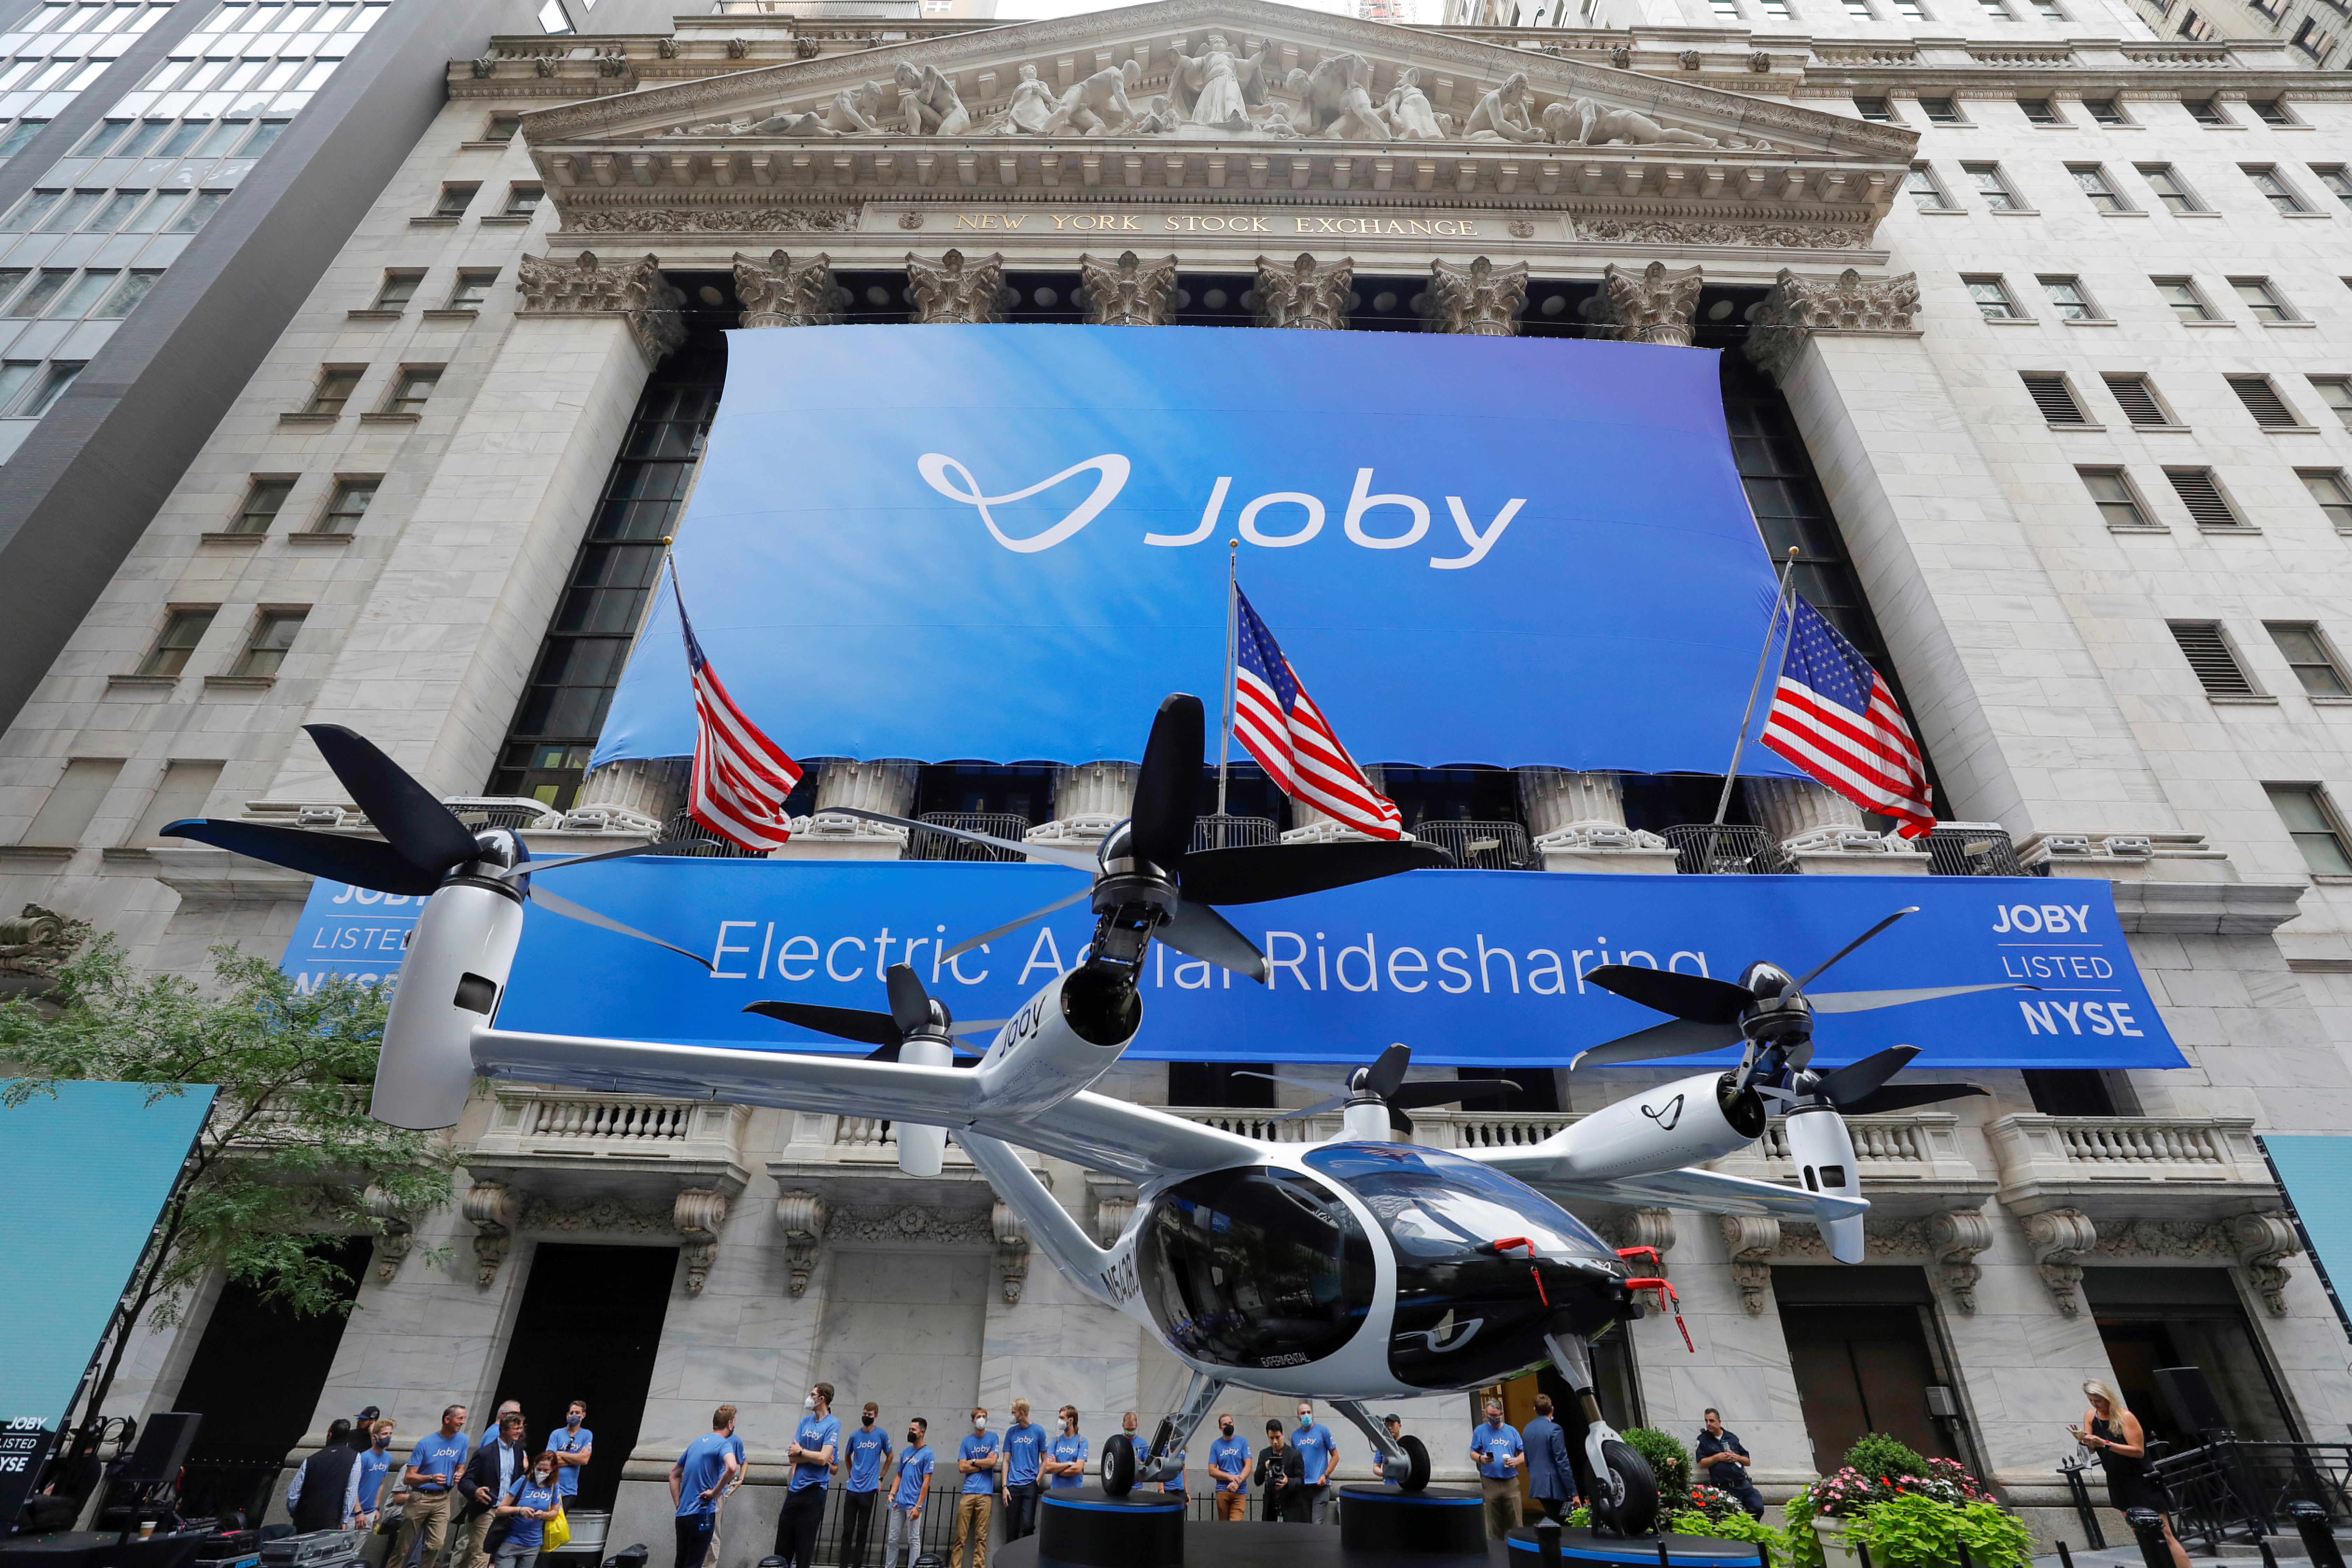 The Joby Aviation Air Taxi is seen outside the New York Stock Exchange in Manhattan